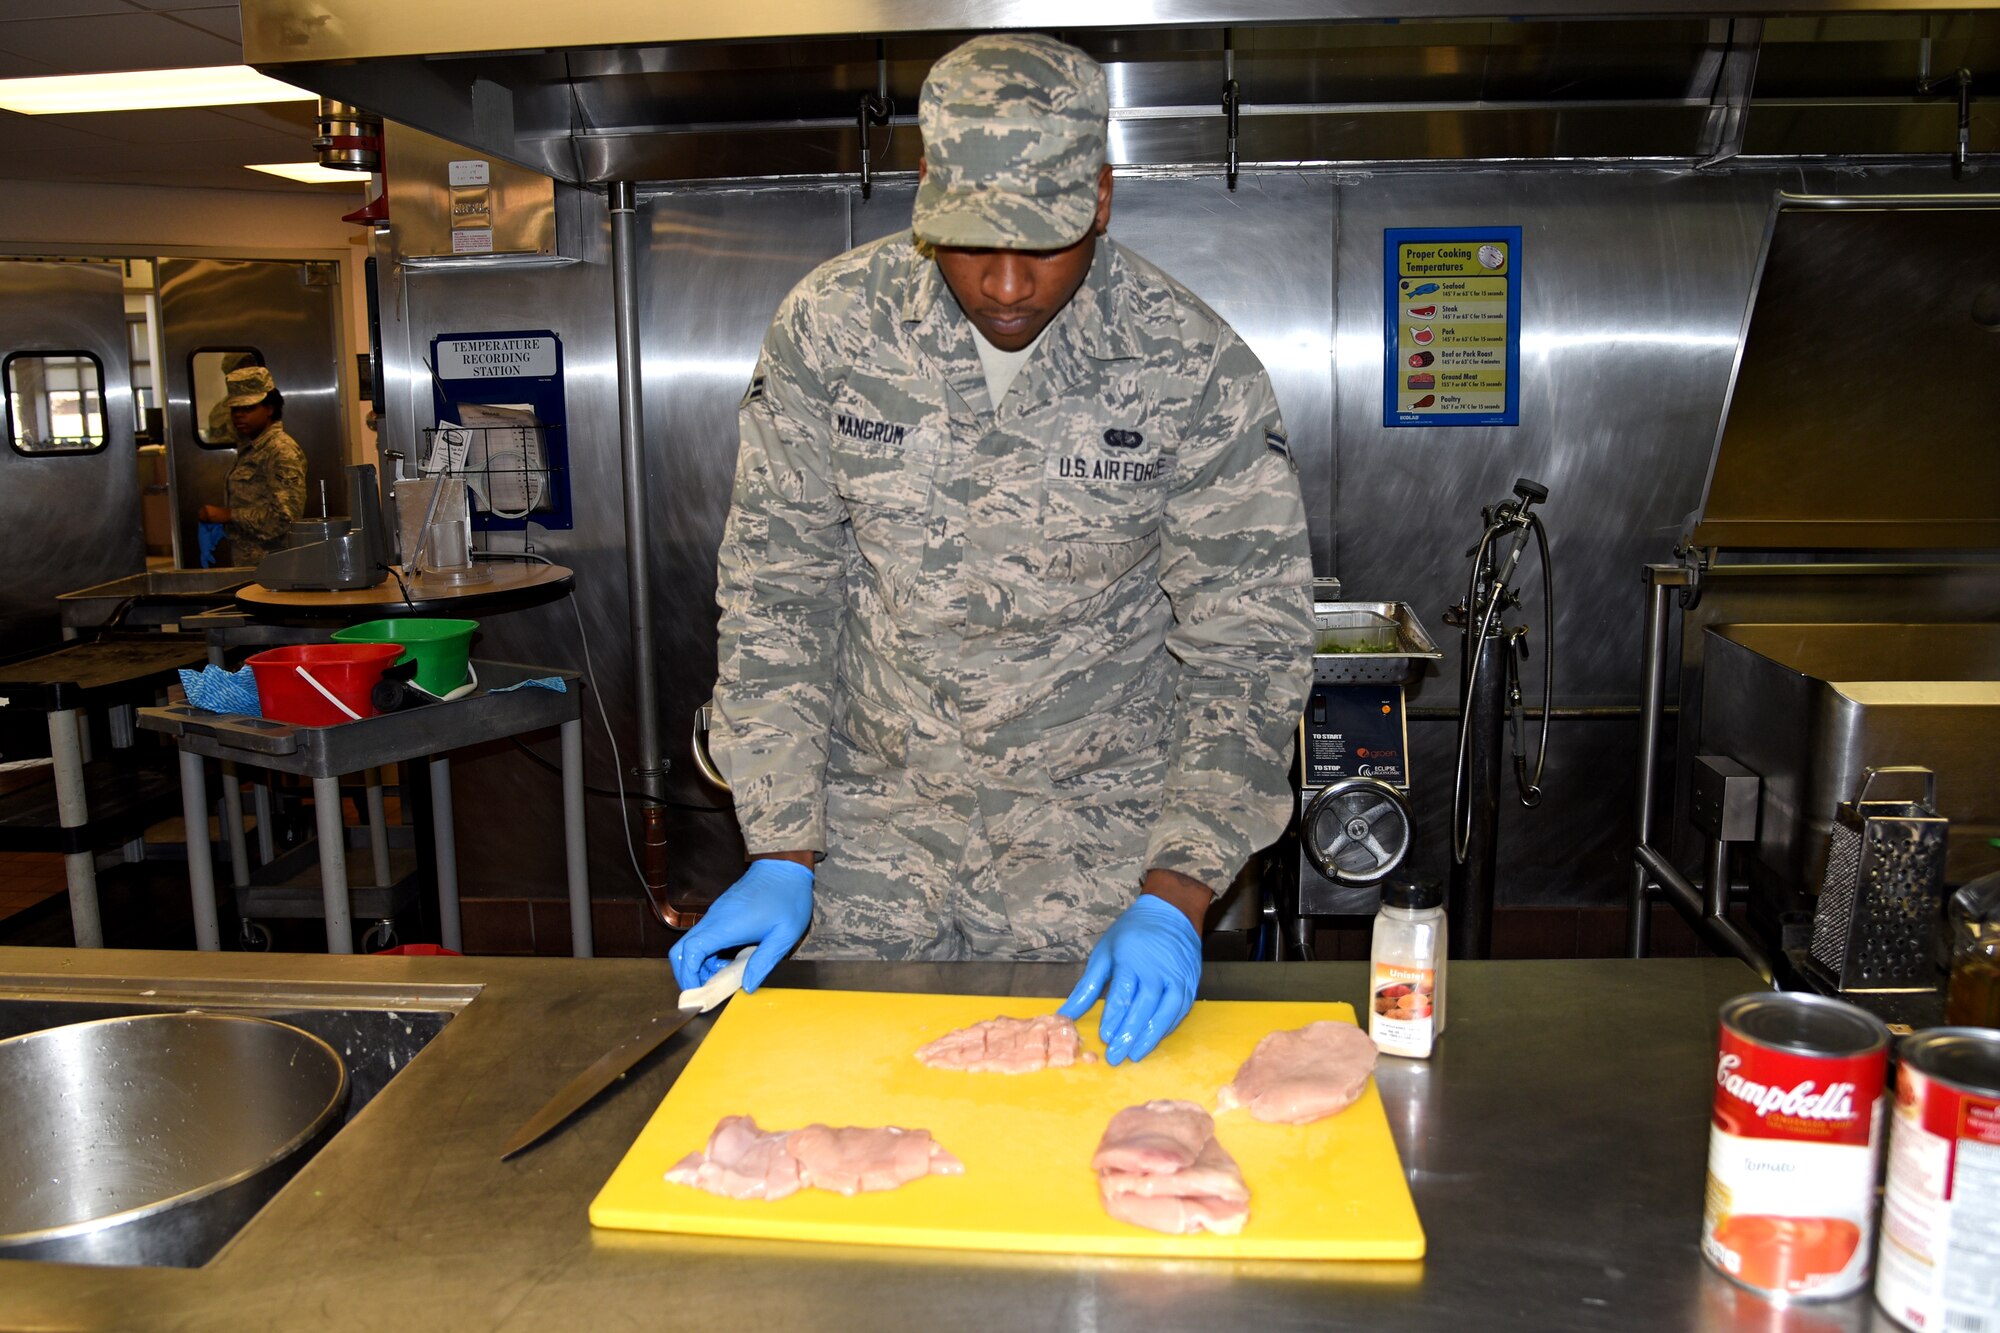 Airman 1st Class Juwan Mangrun slices several pieces of chicken cutlets in preparation to serve lunch to Airmen at Halvorsen Hall Dining facility at Joint Base McGuire-Dix-Lakehurst, N.J., April 16, 2016. Mangrun is a member of the 108th Sustainment Services Flight. (U.S. Air National Guard photo by Airman Tech. Sgt. Armando Vasquez/Released)